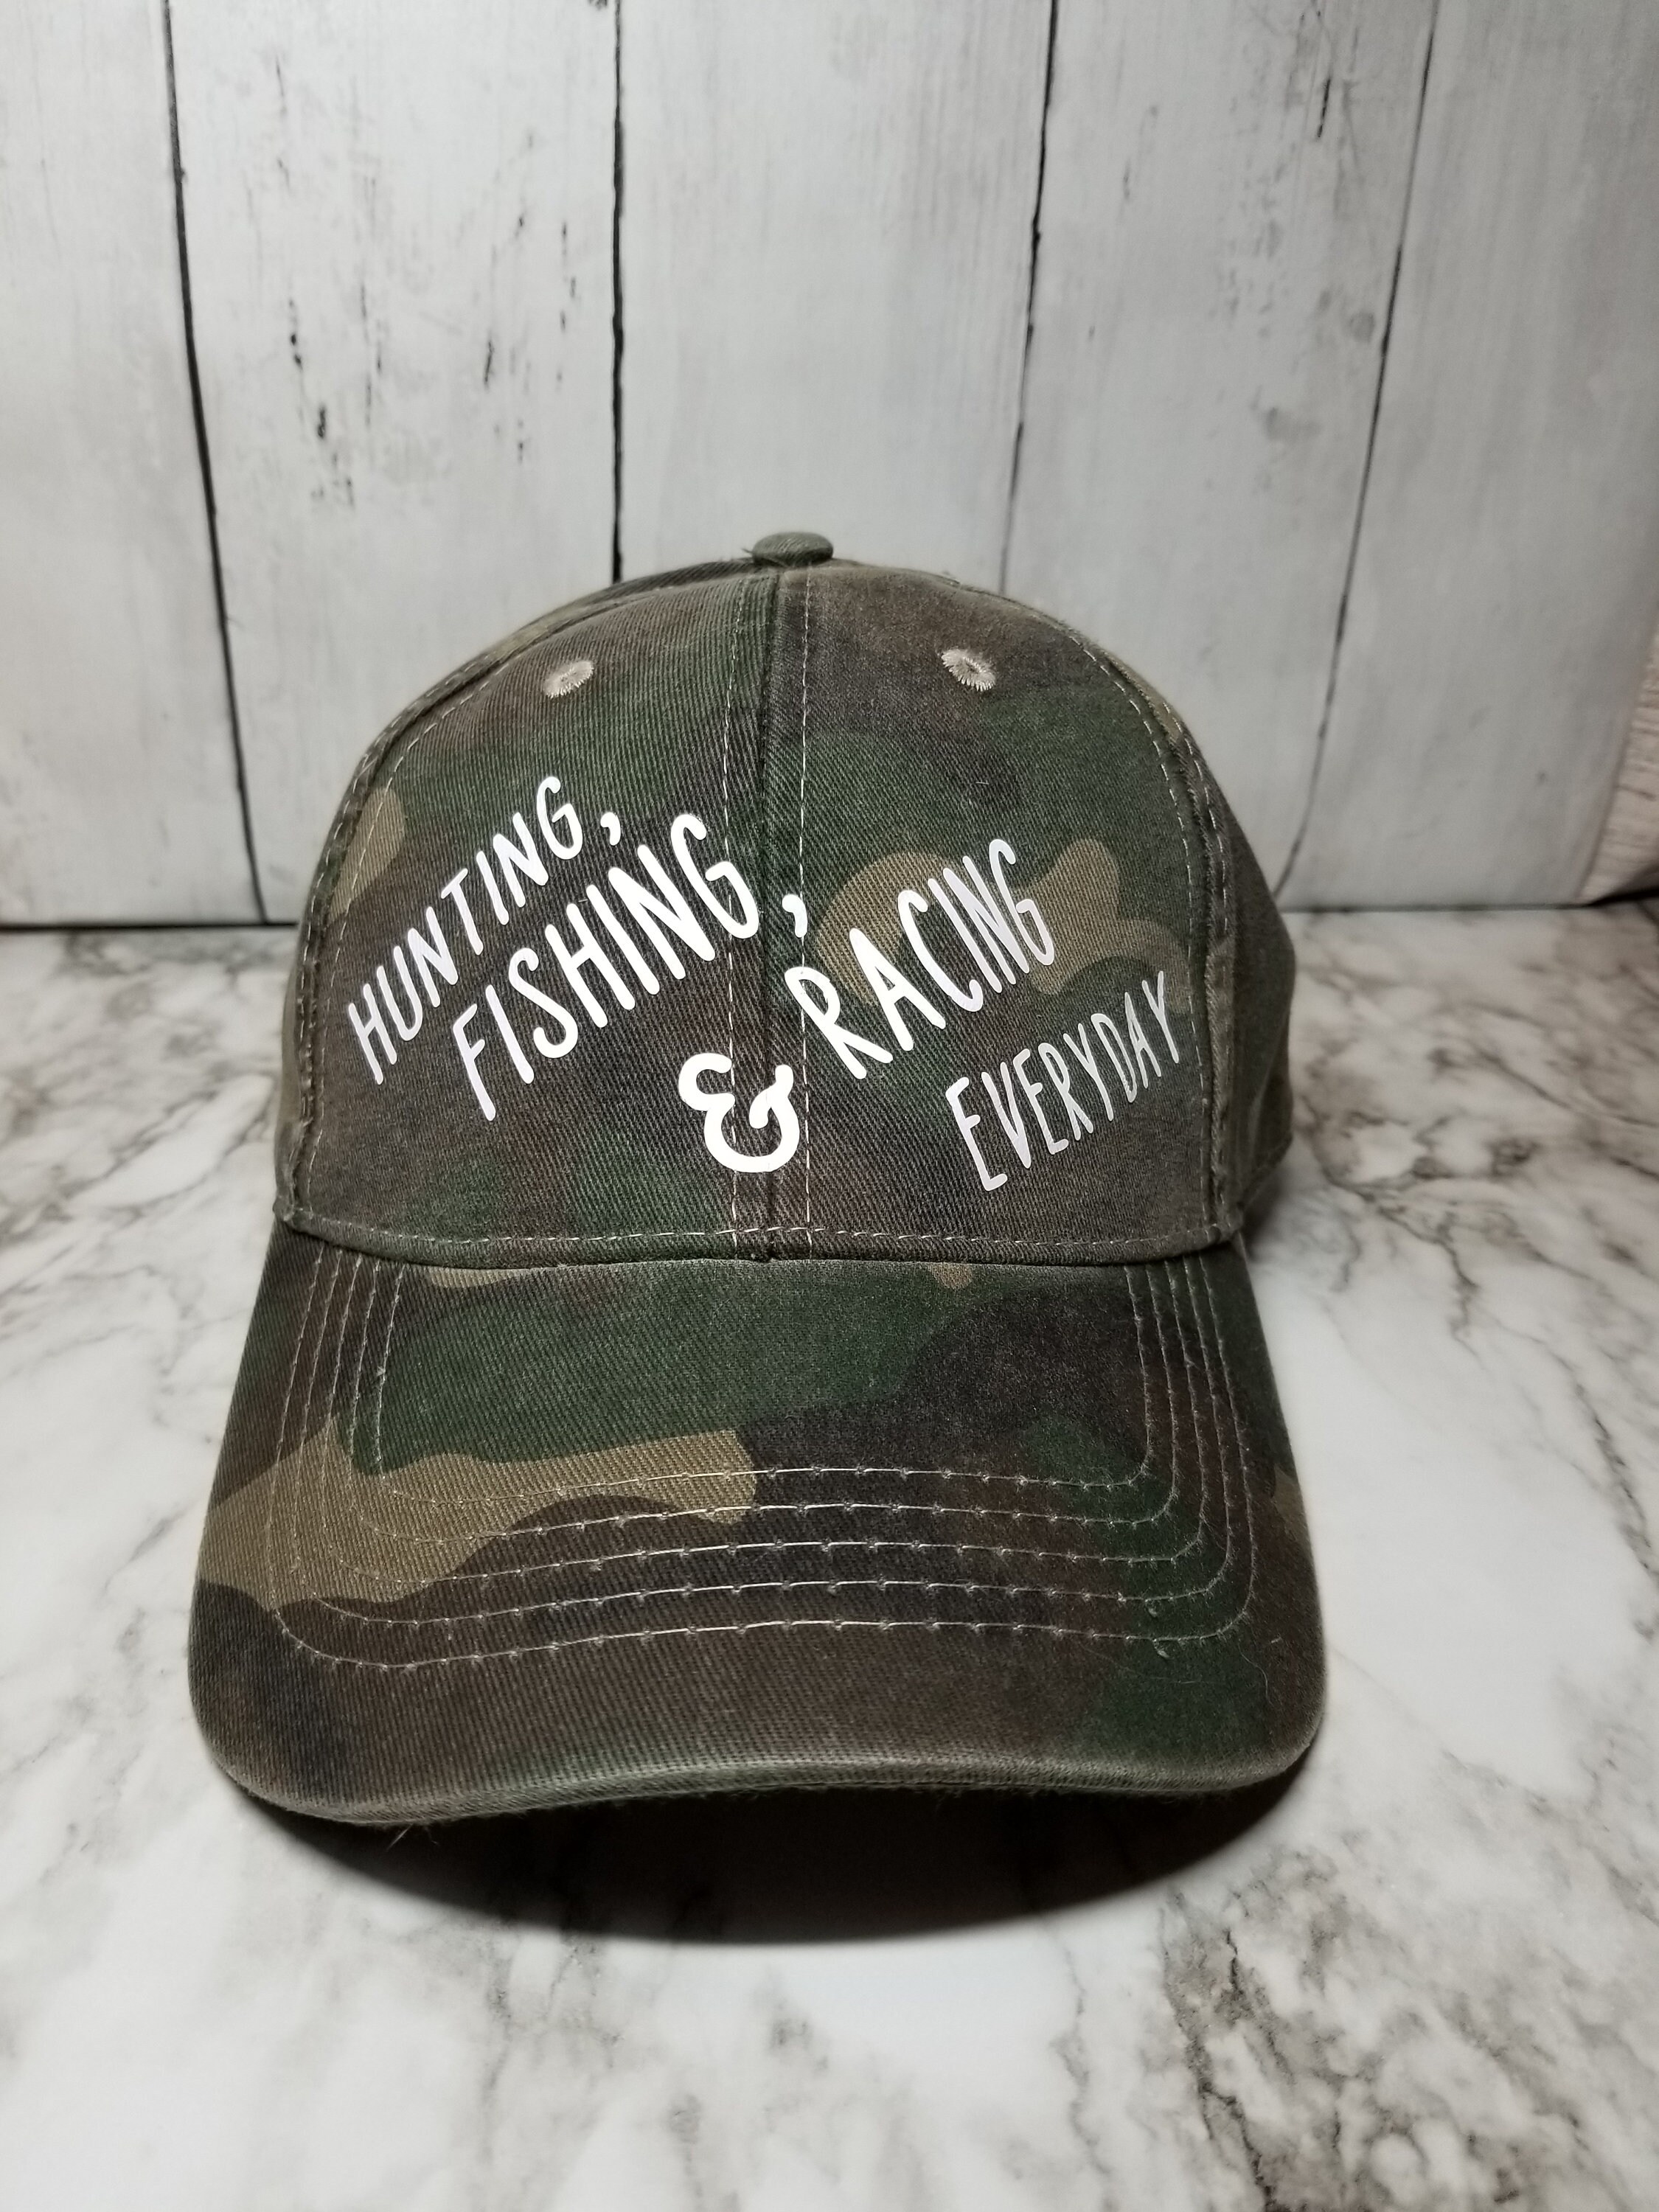 Hunting Fishing and Racing Everyday - Etsy